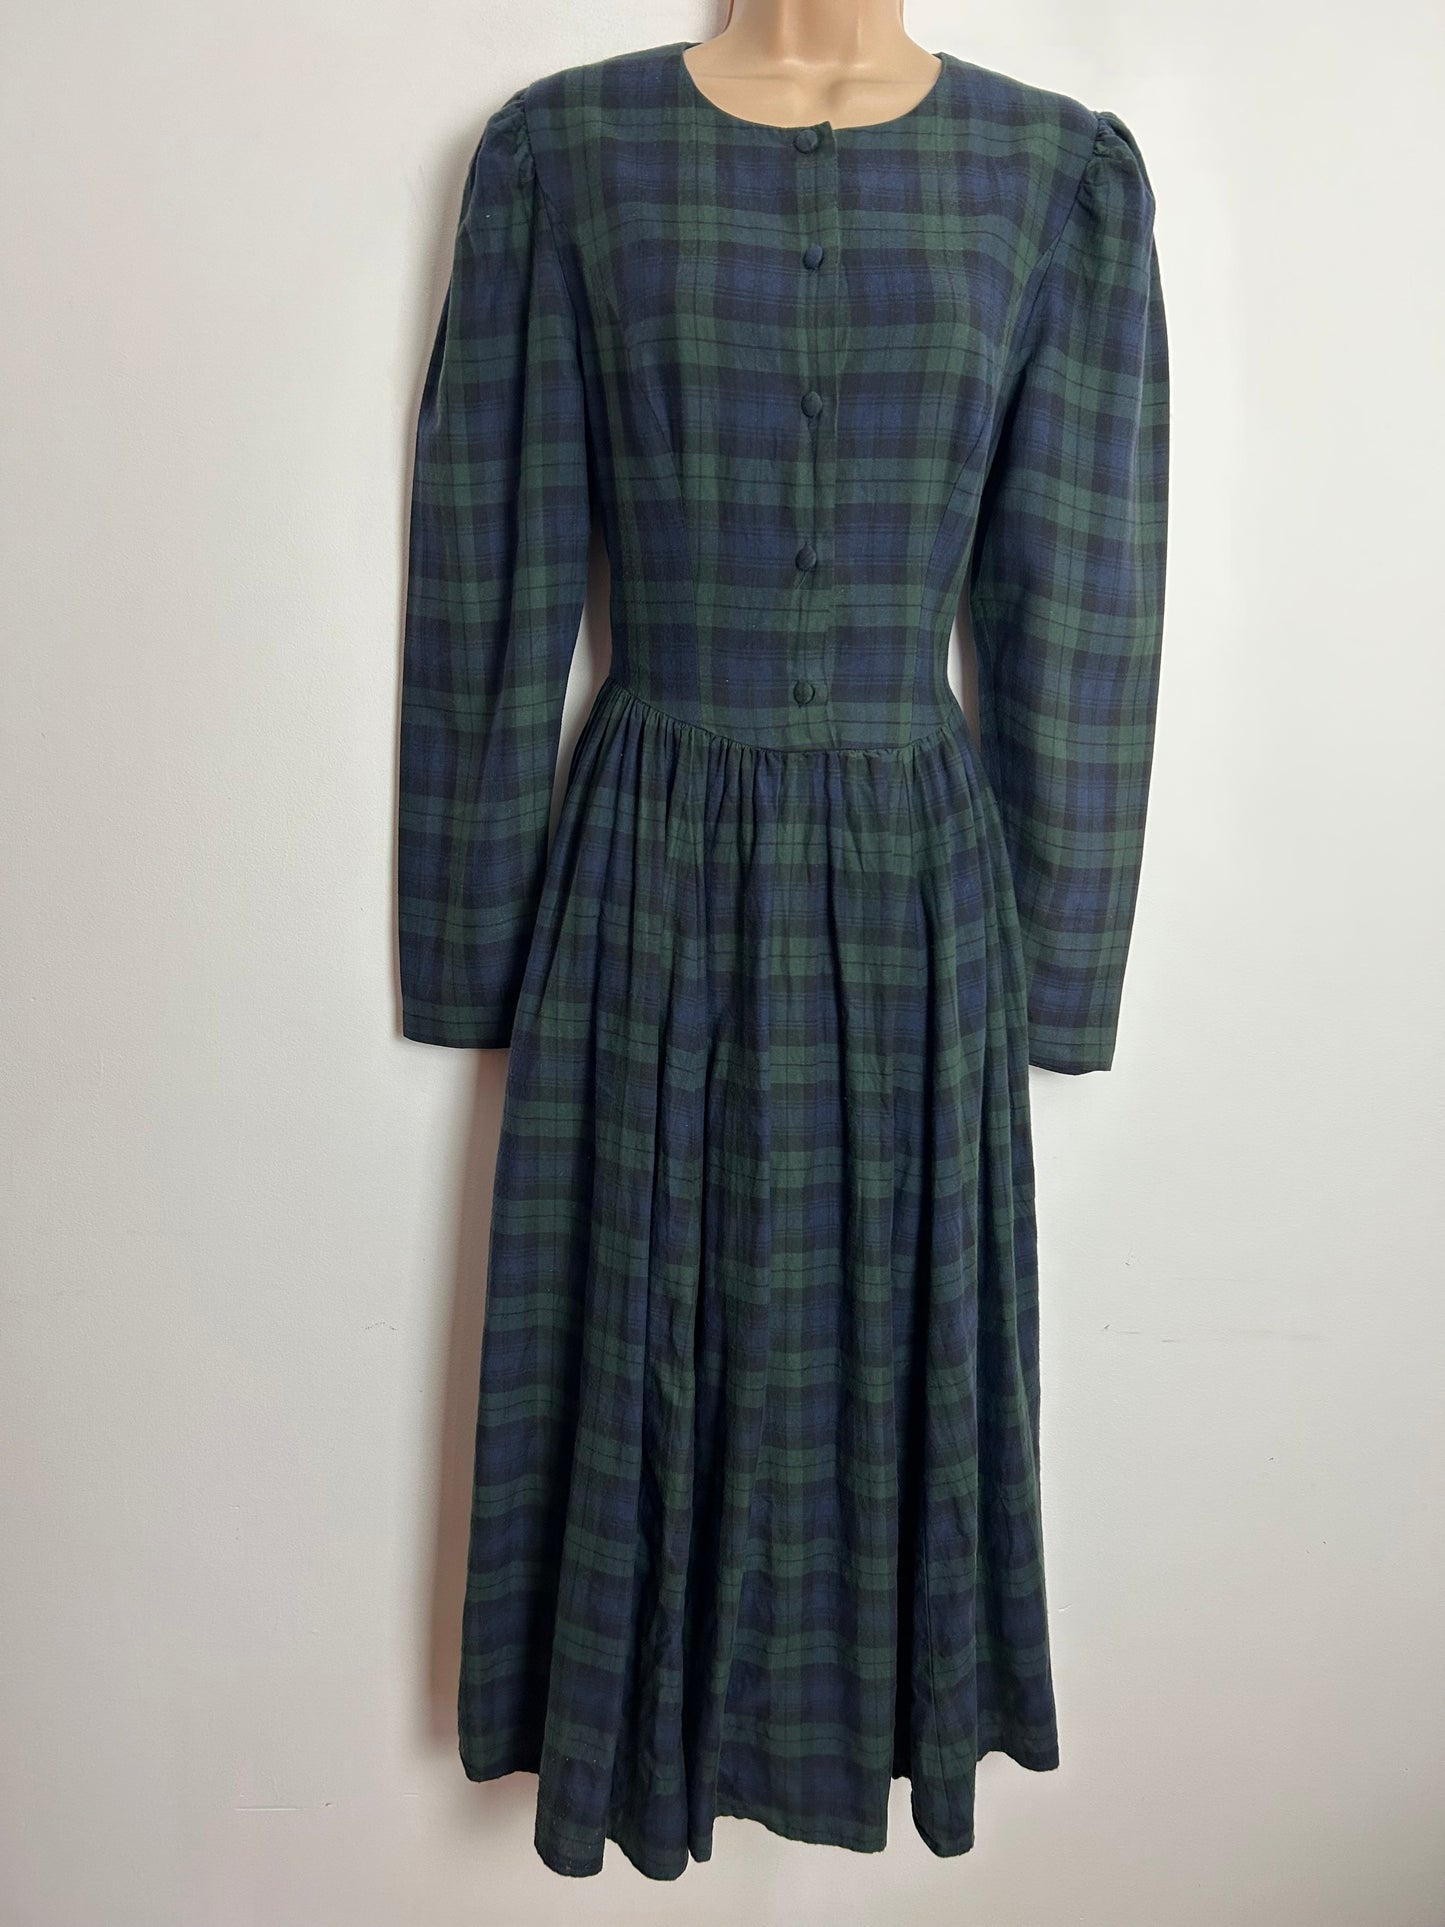 Vintage 1980s LAURA ASHLEY Made in Hungary UK Size 8 (12 On Label) Dark Blue & Green Check Print 100% Cotton Gather Pleated Midi Day Dress